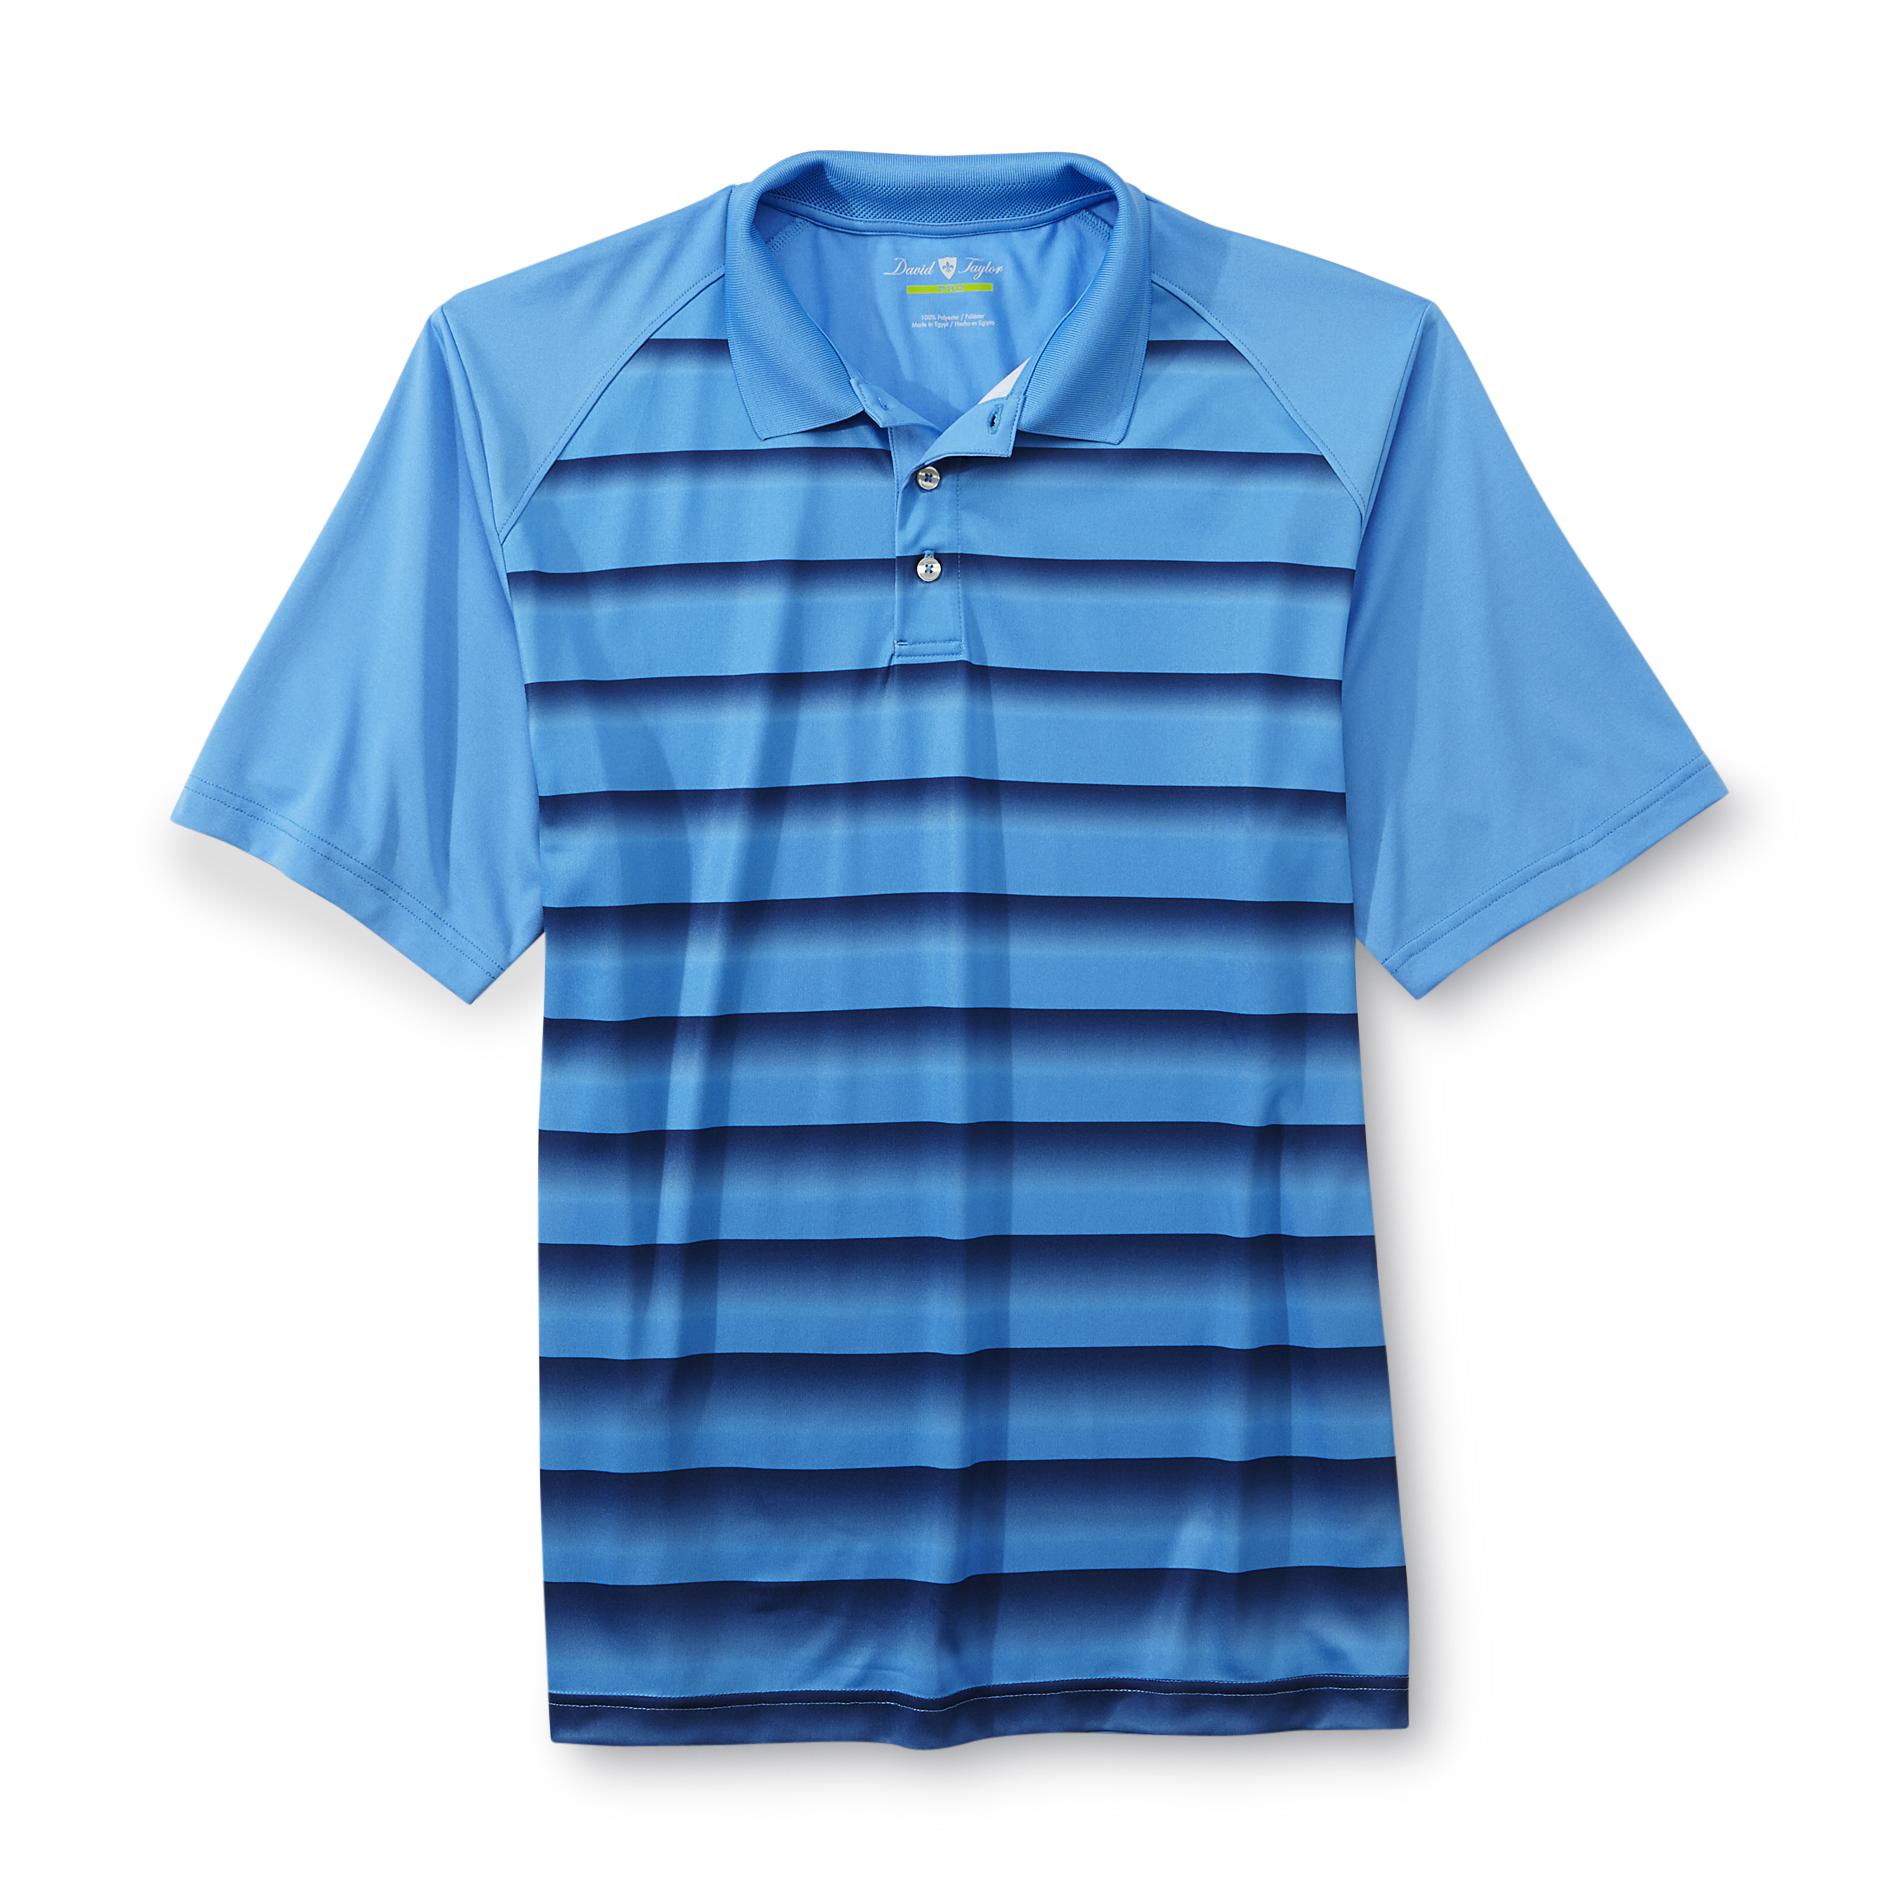 David Taylor Collection Men's Big & Tall Jersey Polo Shirt - Ombre Striped